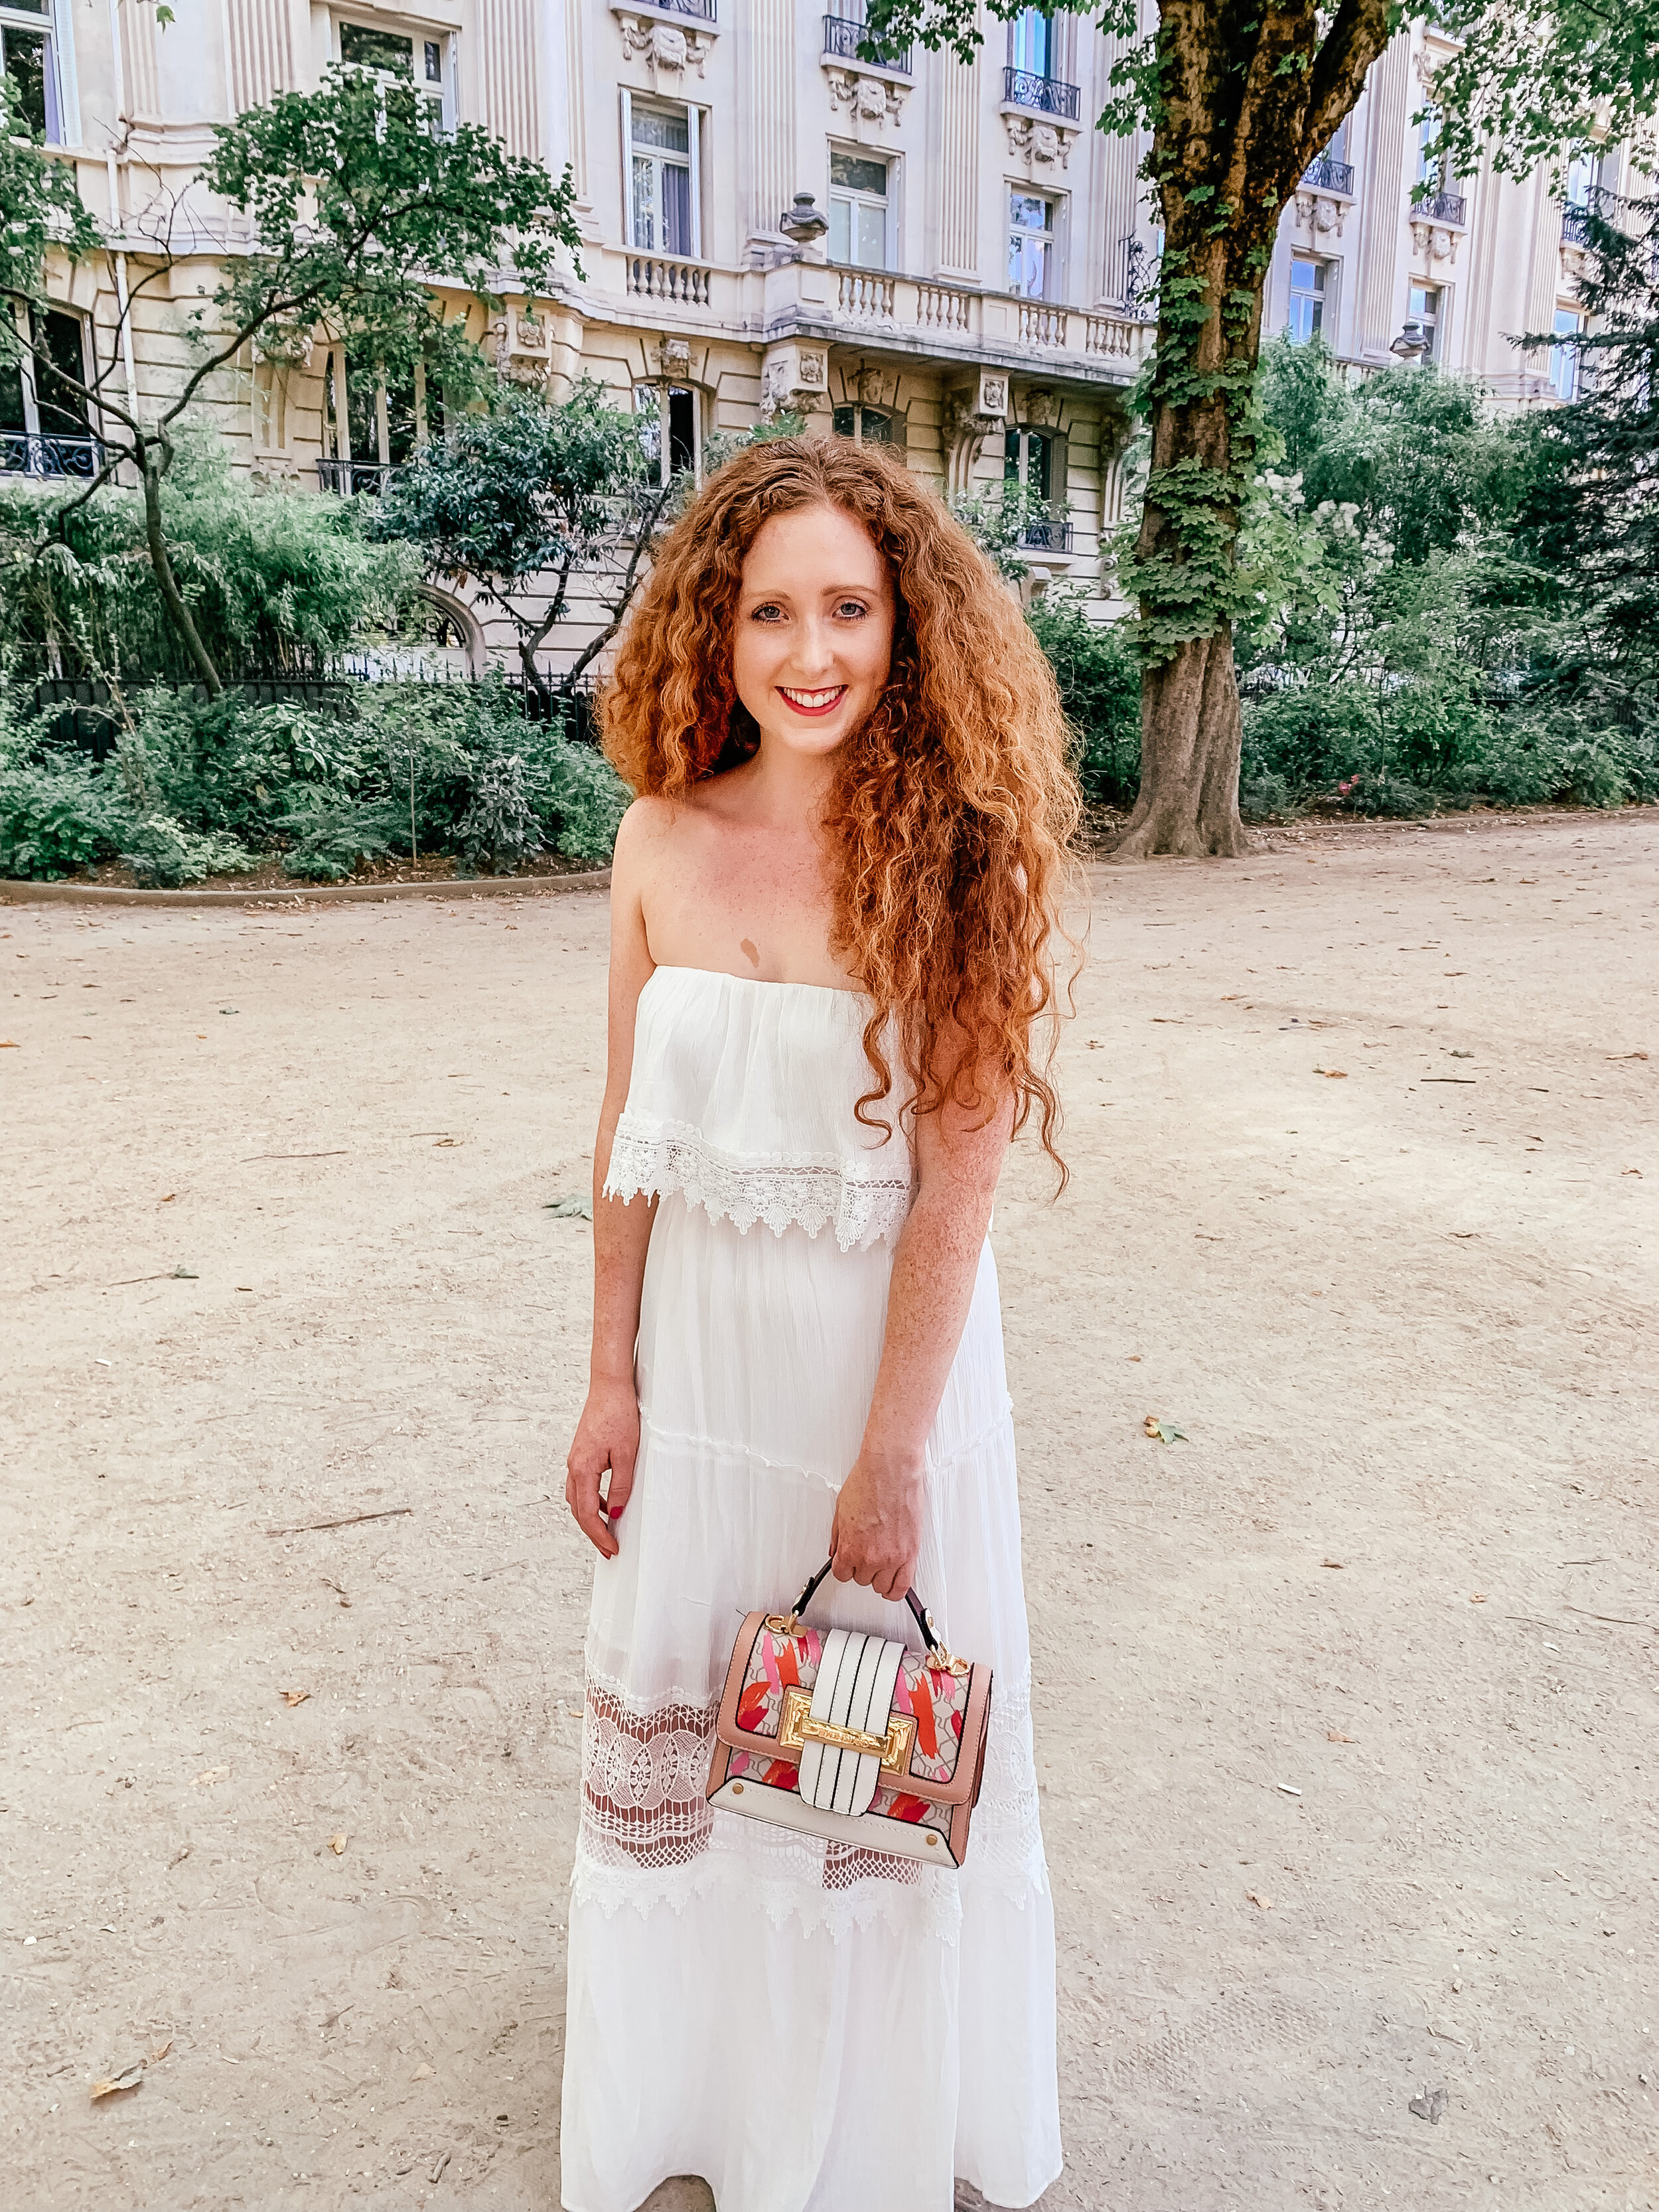 White maxi dress - 5 white capsule pieces for your wardrobe for summer 2020